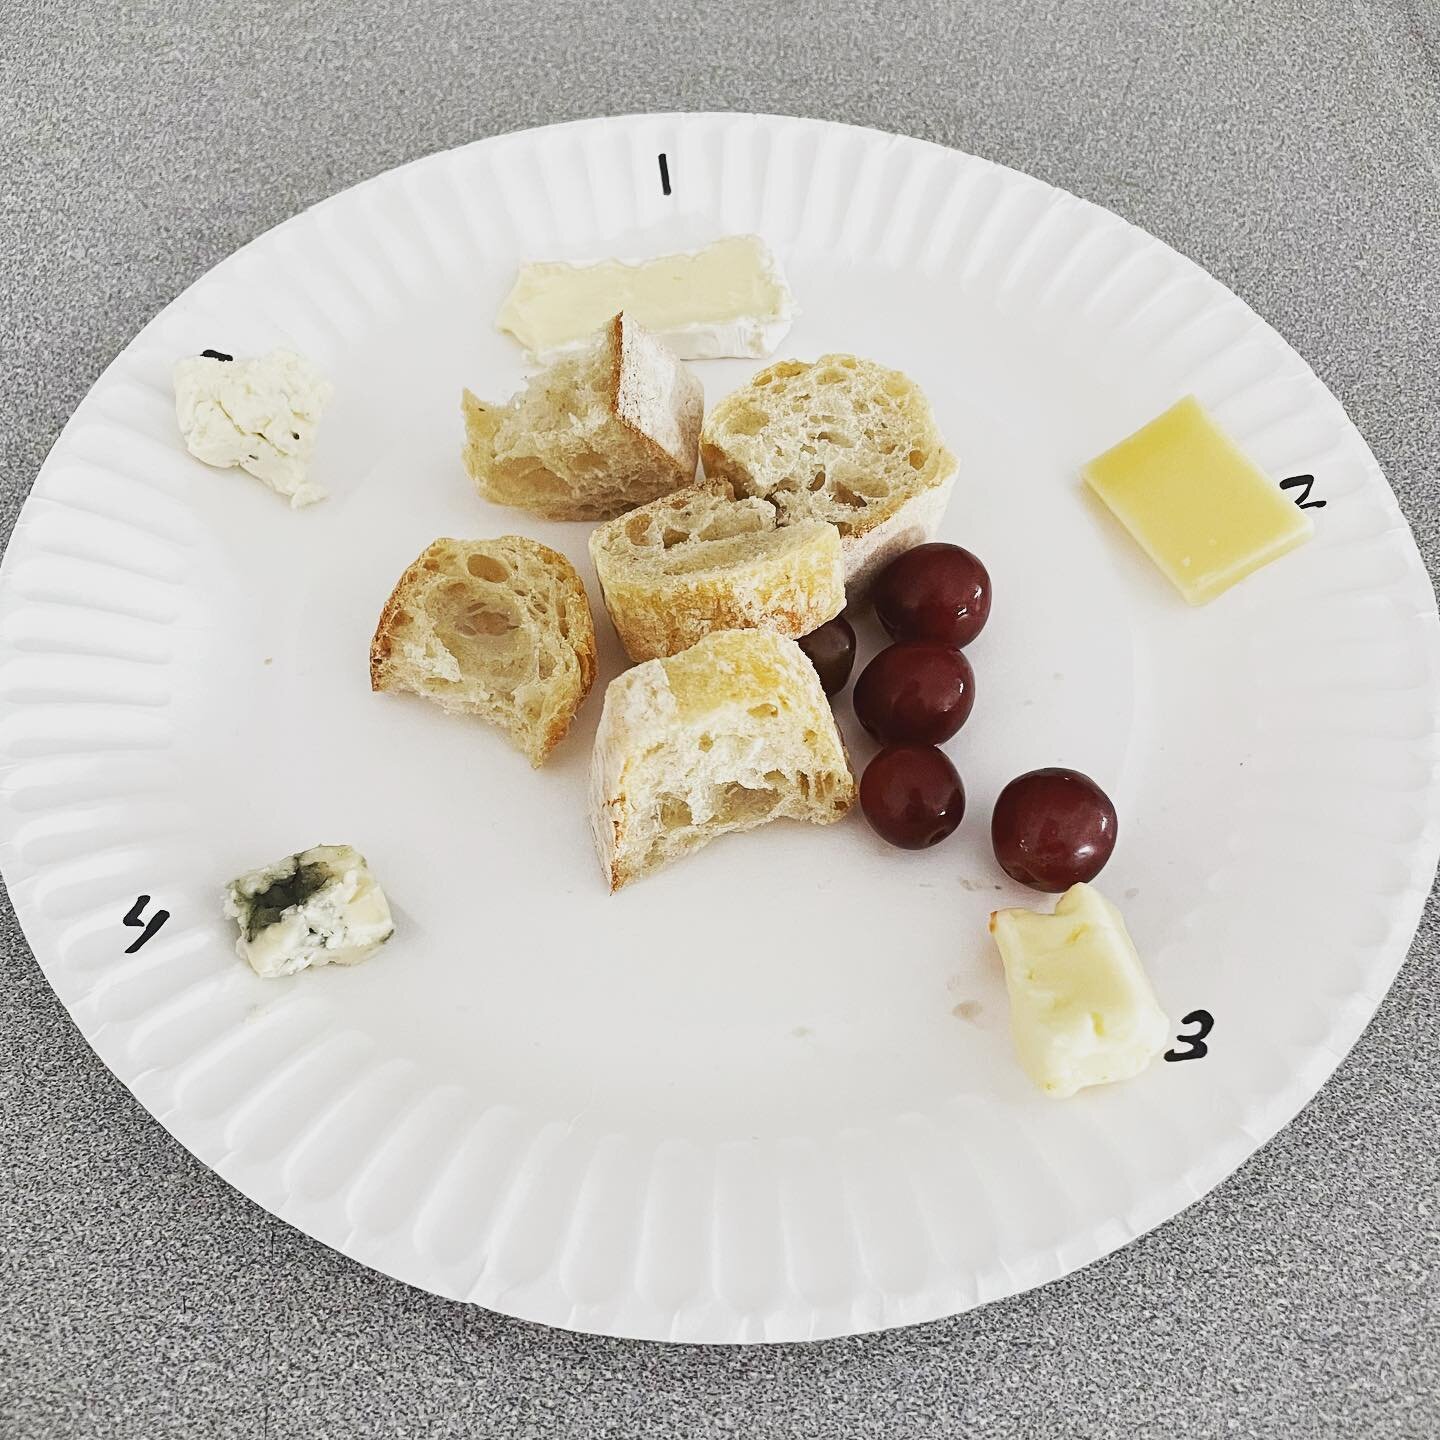 Did a cheese tasting as part of our last week of school f&ecirc;te. I&rsquo;ve wanted to do this activity for a long time and I&rsquo;m so glad I finally did. I&rsquo;m surprised how they were all so willing to try new cheeses and many even ate the R